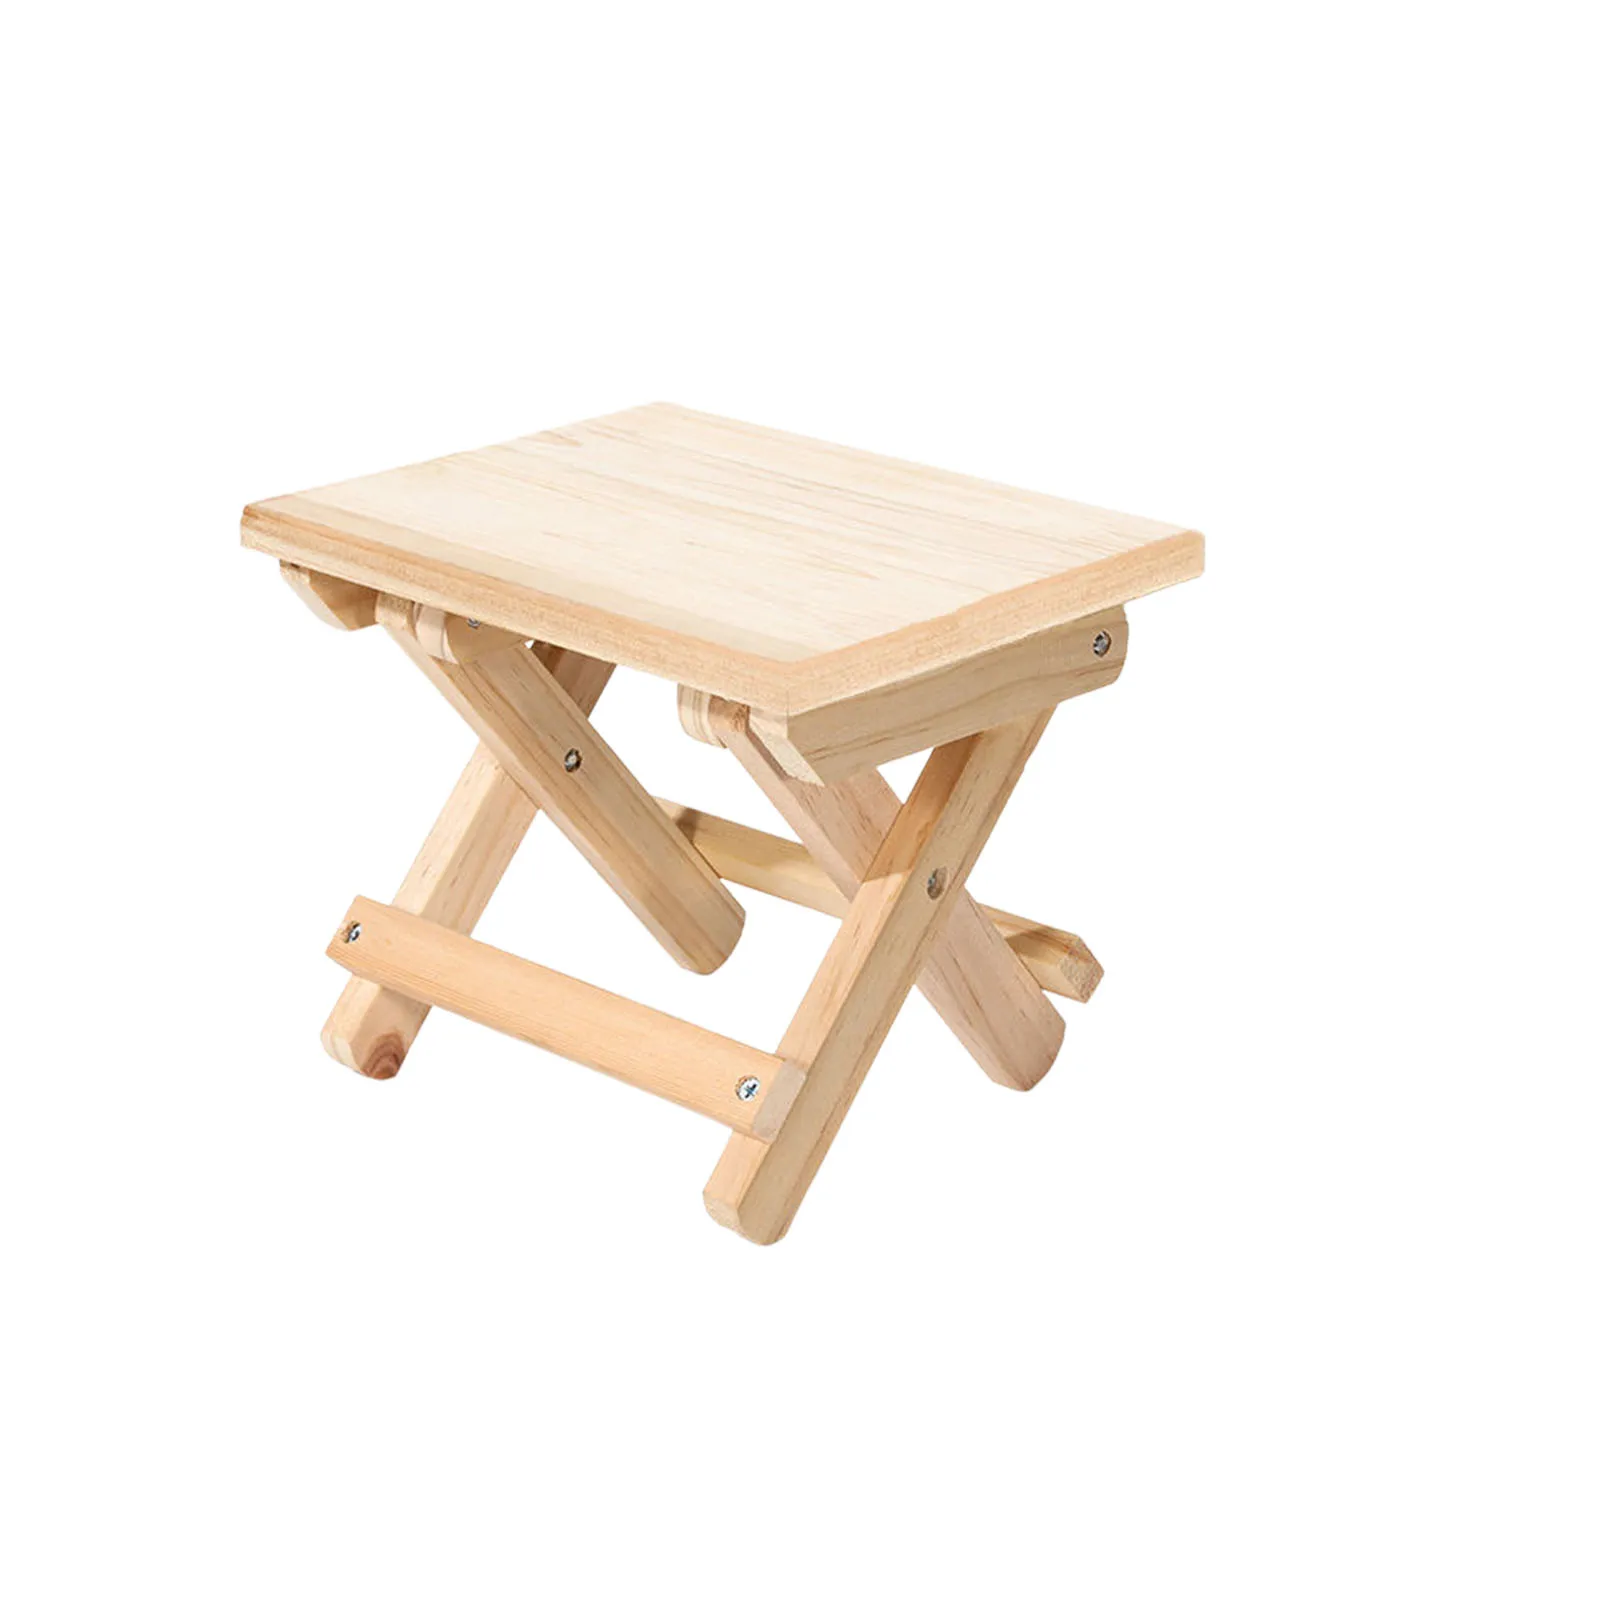 

Folding Step Stool Bench Portable Outdoor Square Table Foot Rest Shaving Stool Durable Storage Shelf Great For Spa Sauna Wooden